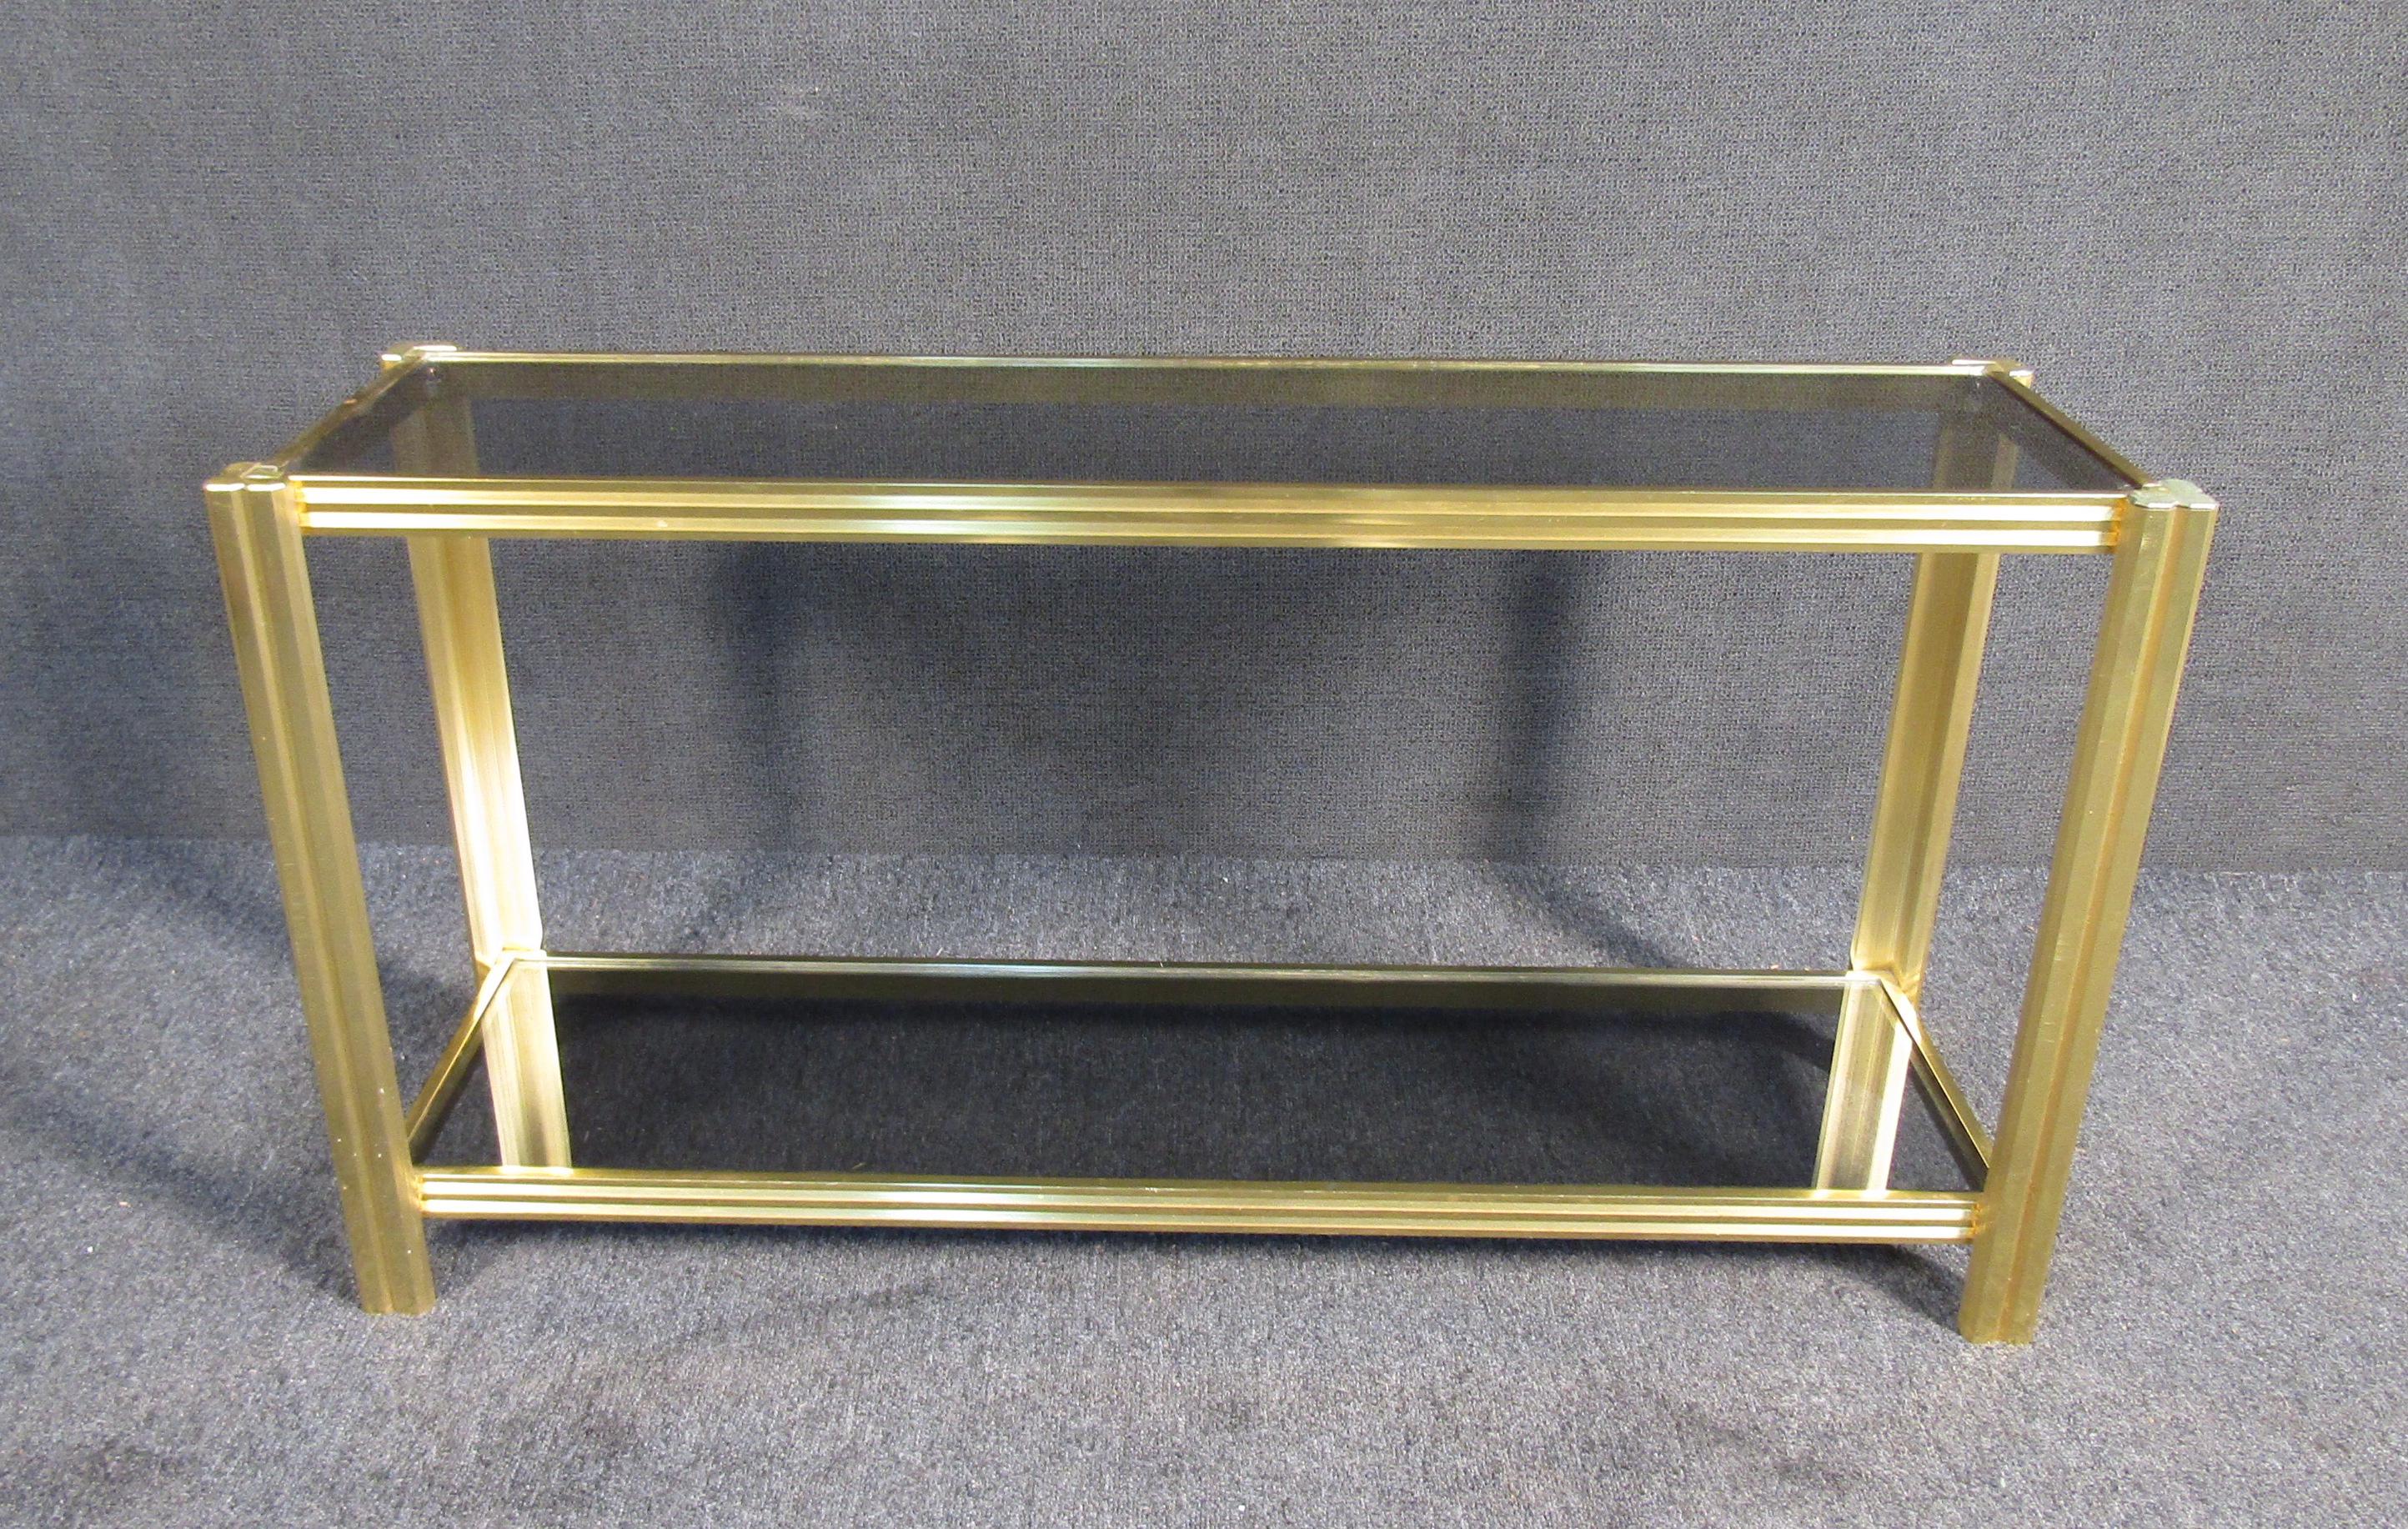 Vintage modern style two tier console table featuring smoked glass.

Please confirm item location (NJ or NY).